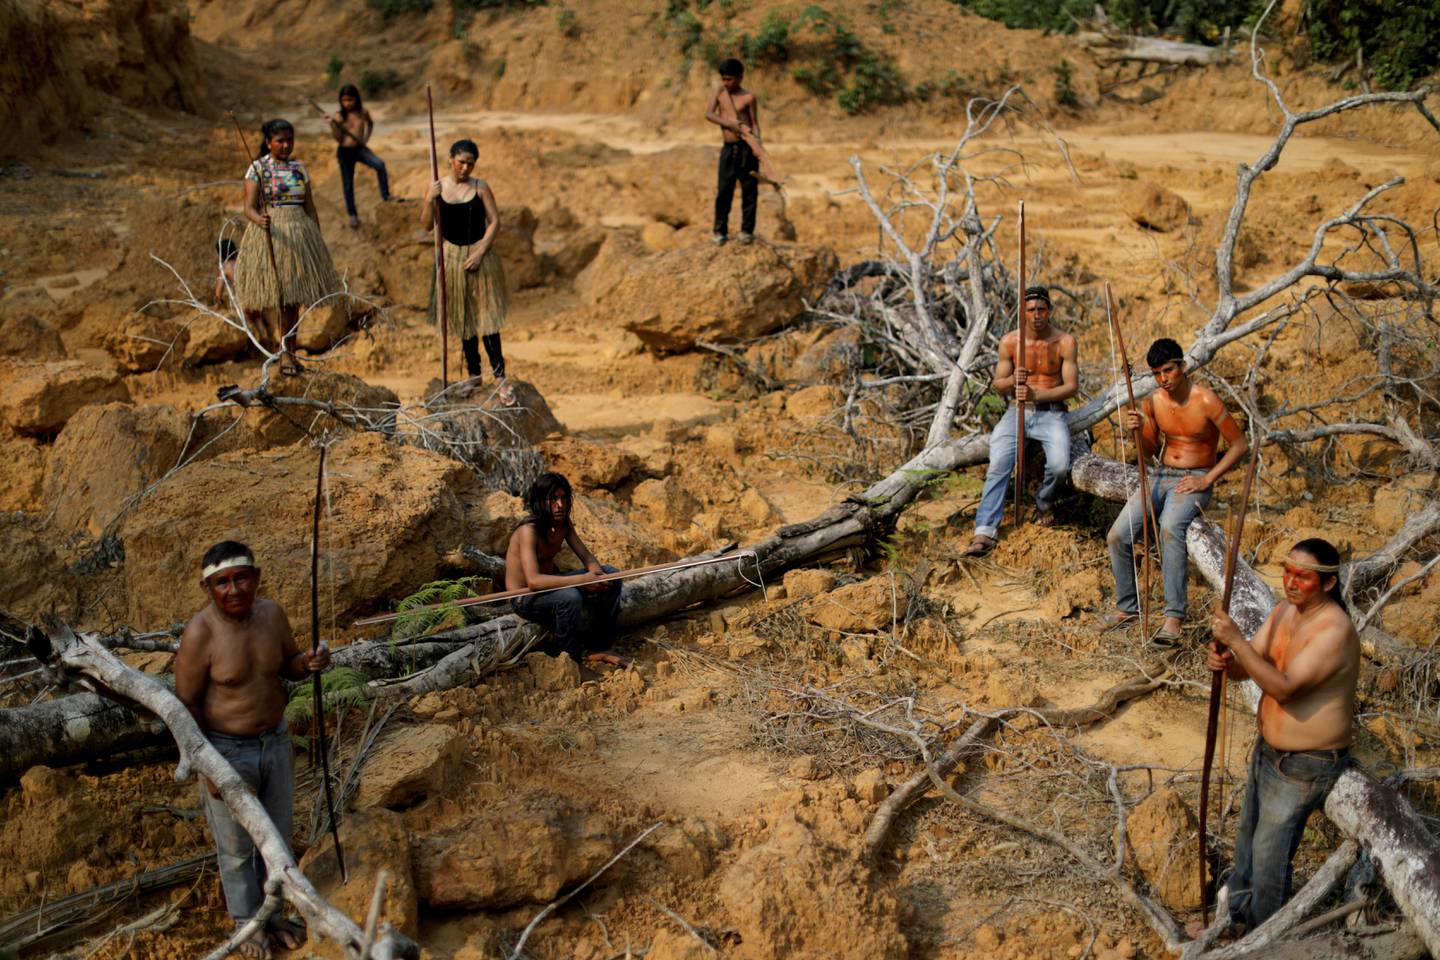 Indigenous people from the Mura tribe show a deforested area in the Amazon rainforest, near Humaita, Amazonas State, Brazil. Reuters